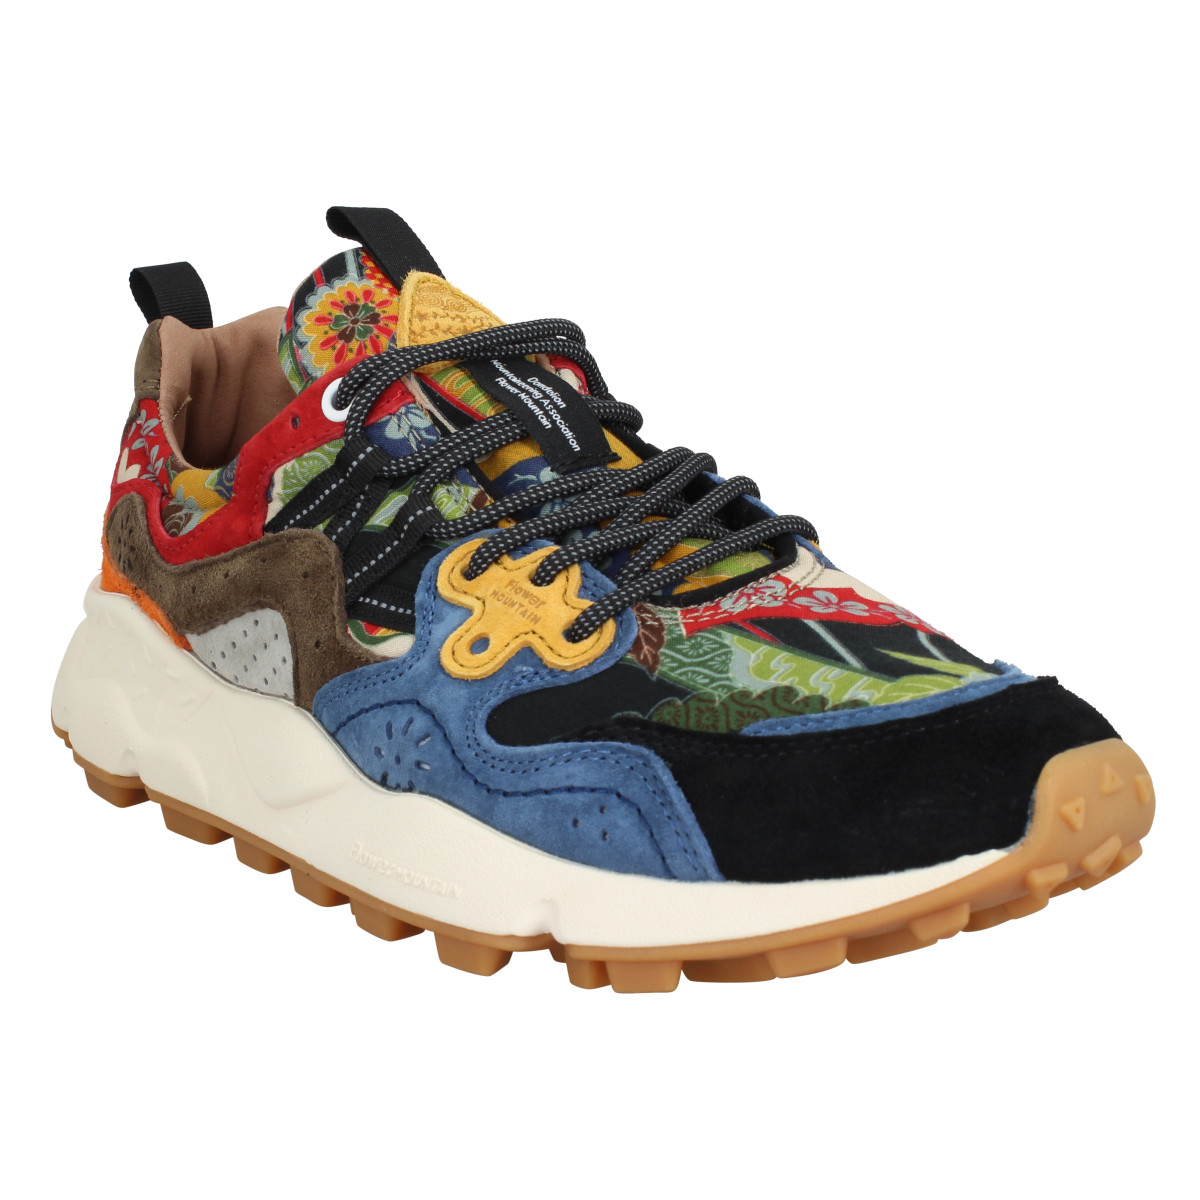 Flower Mountain Marque Yamano Suede...